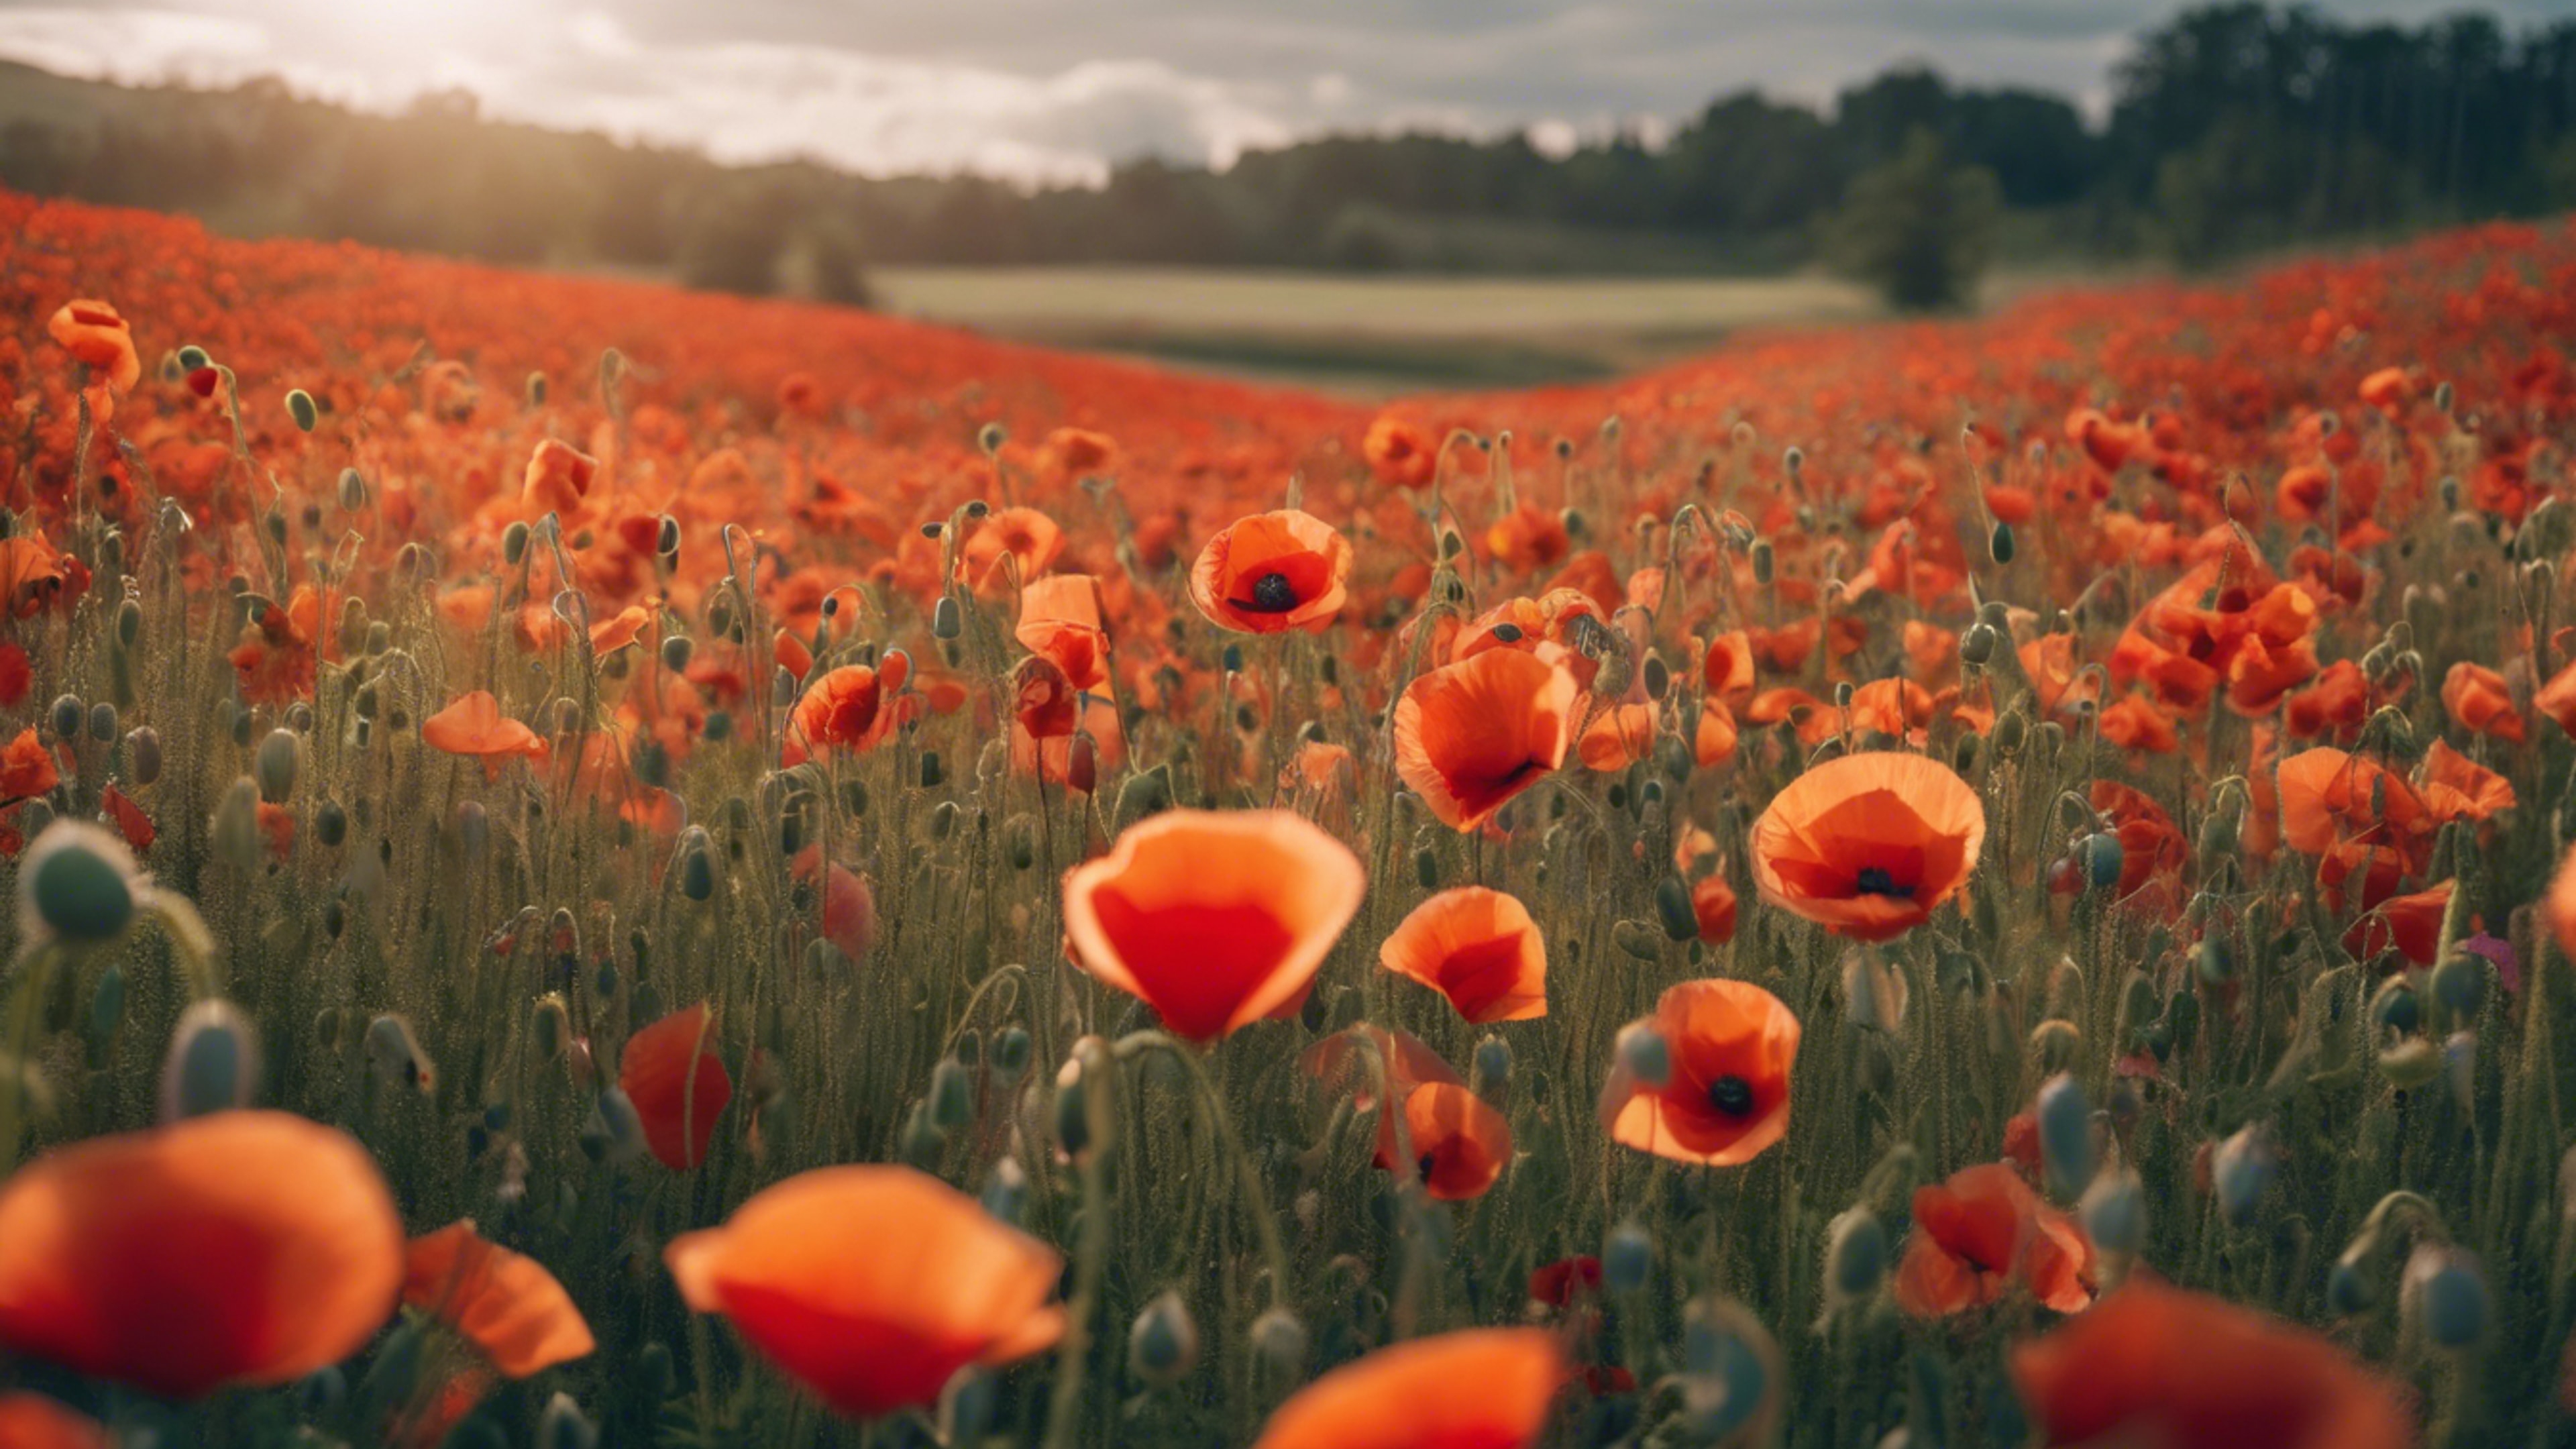 A poppy field with a vibrant rainbow arching over it after a light shower. Wallpaper[9394a4bef51449299ecc]